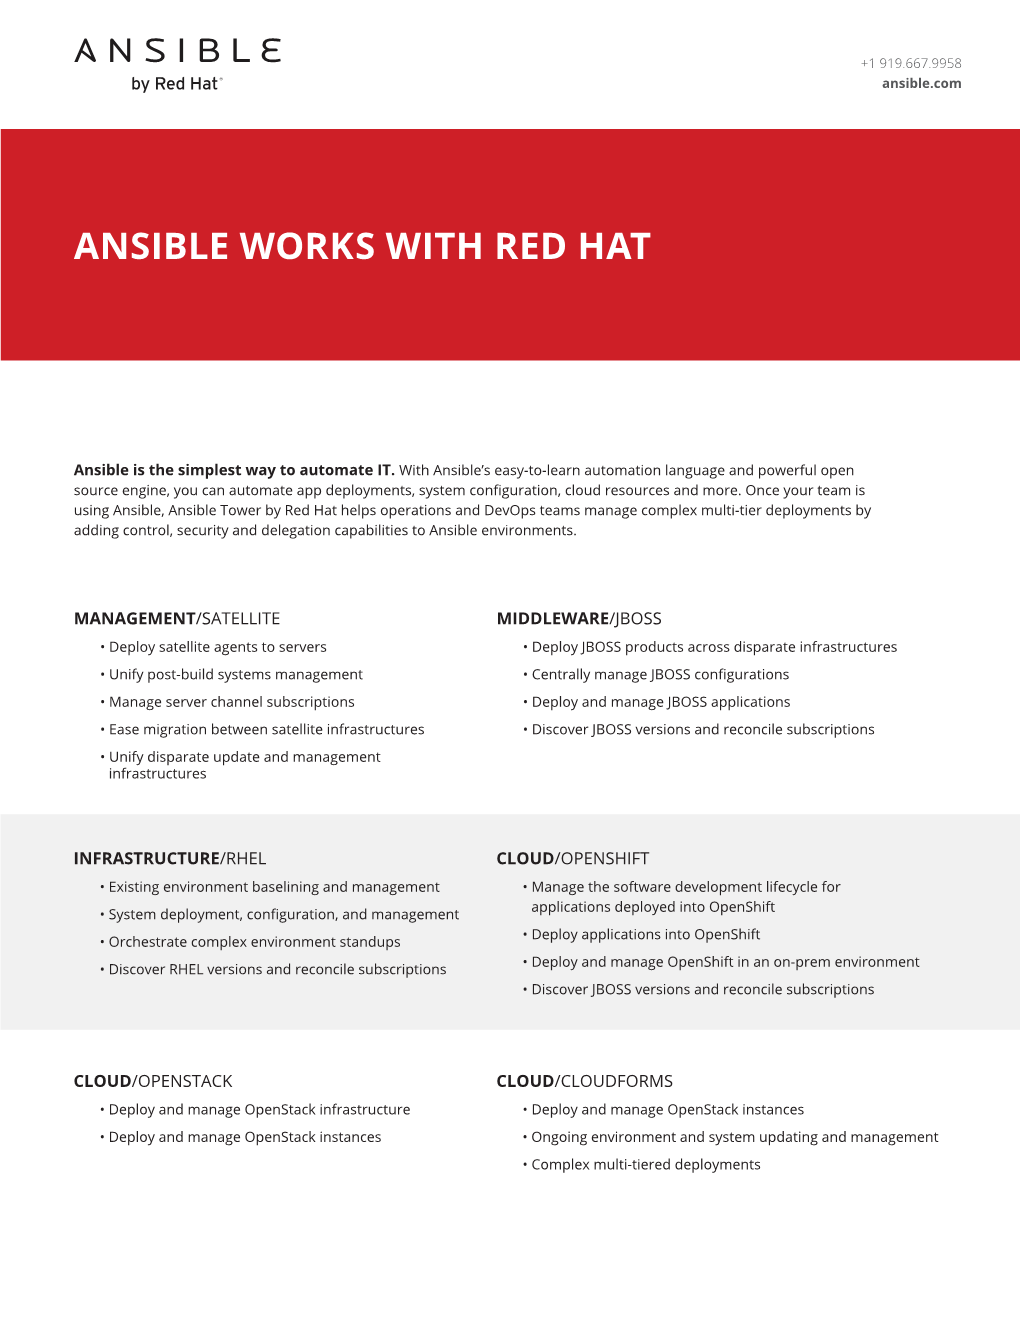 Ansible Works with Red Hat